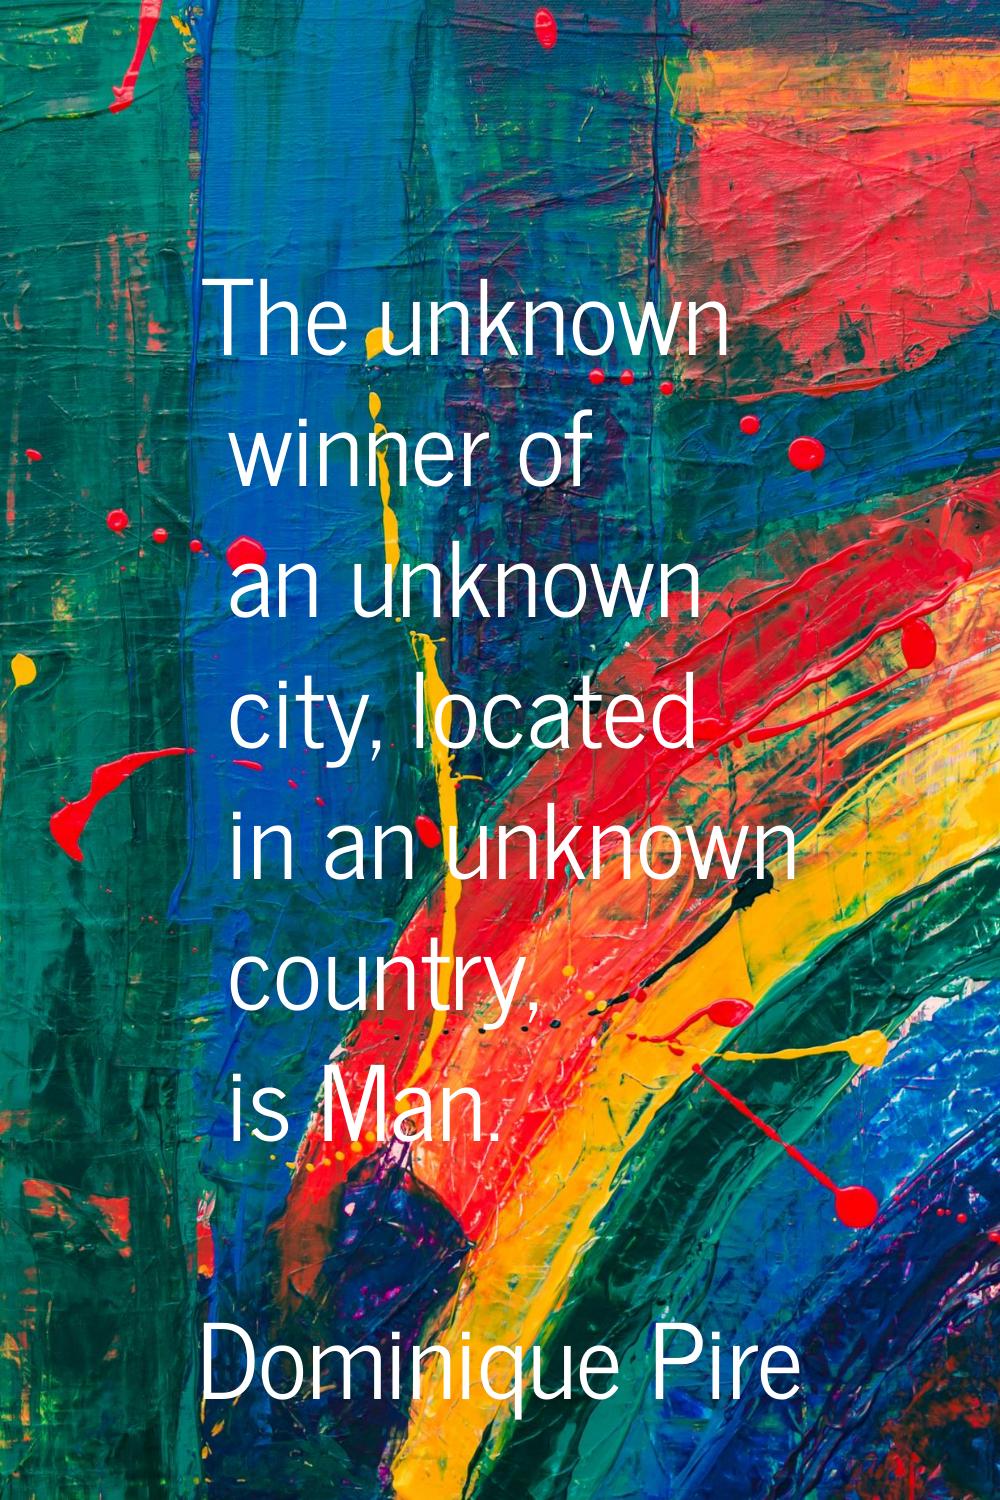 The unknown winner of an unknown city, located in an unknown country, is Man.